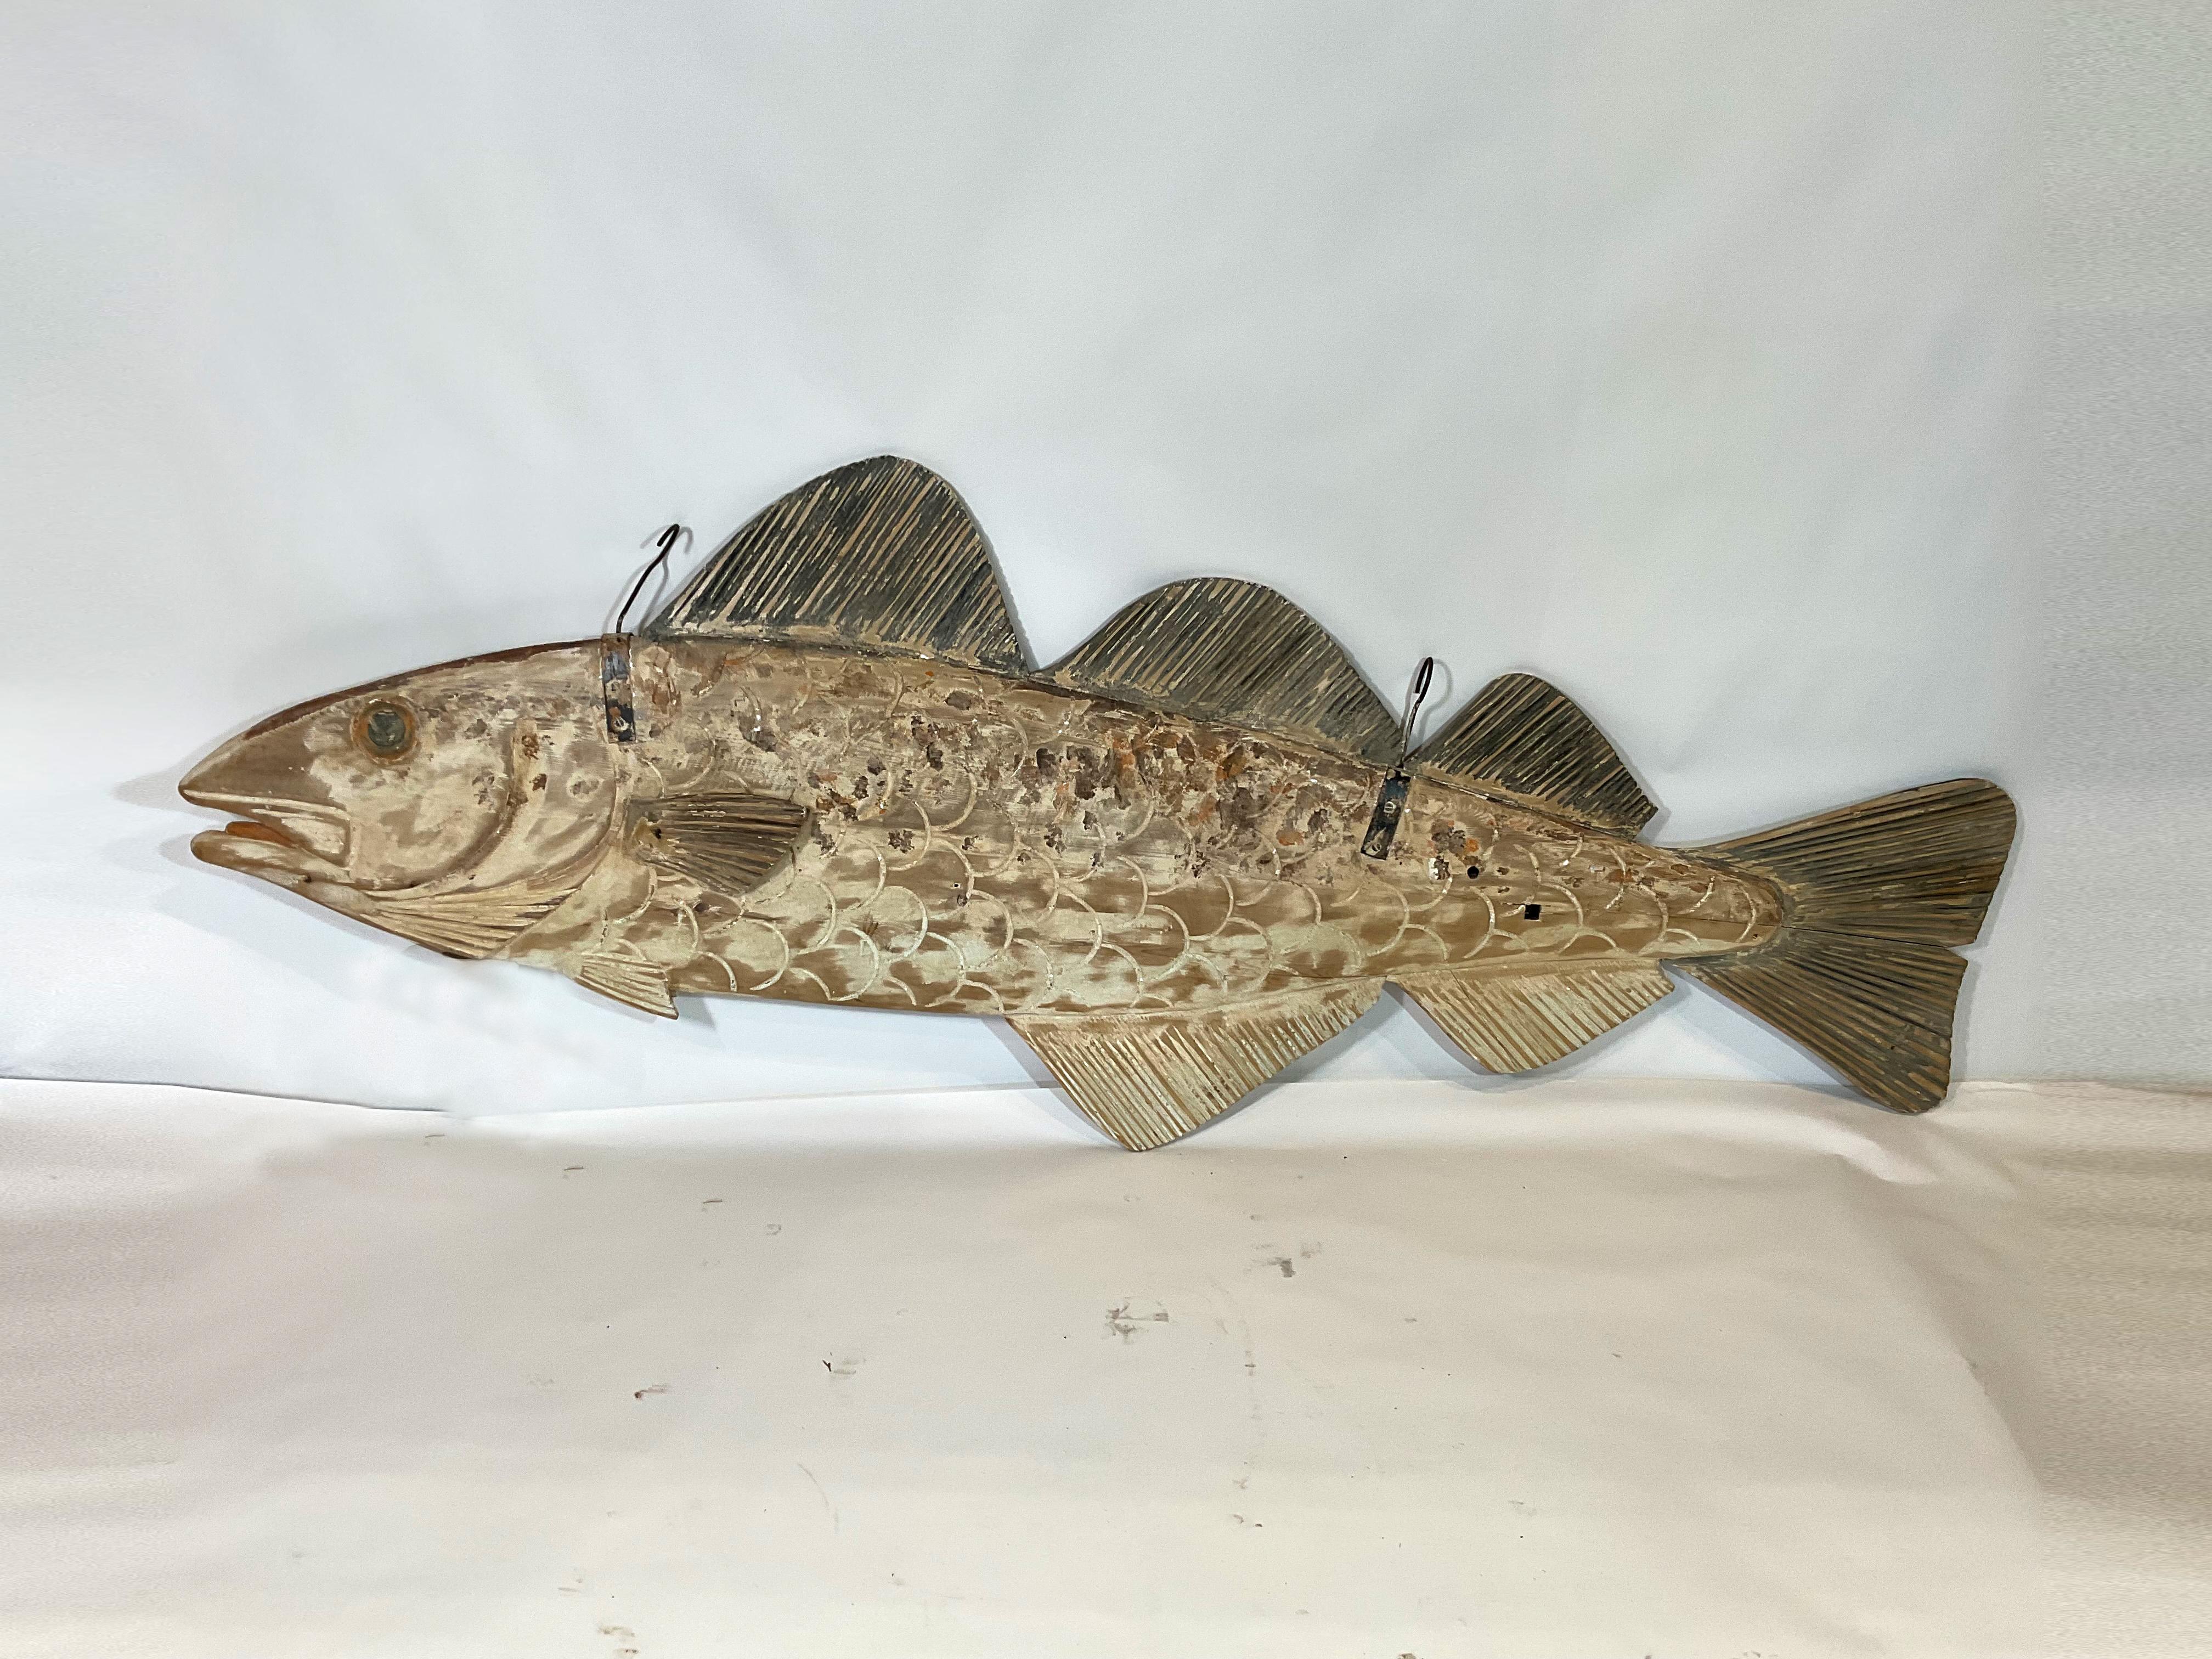 Eight-foot two-sided hanging fish with carved gills, fins, snout, eyes, scales, etc. Fitted with two hooks from England. In the style of trade signs that hung over the stalls in the Dover England Seafood docks. Missing a fin on one side.

Weight: